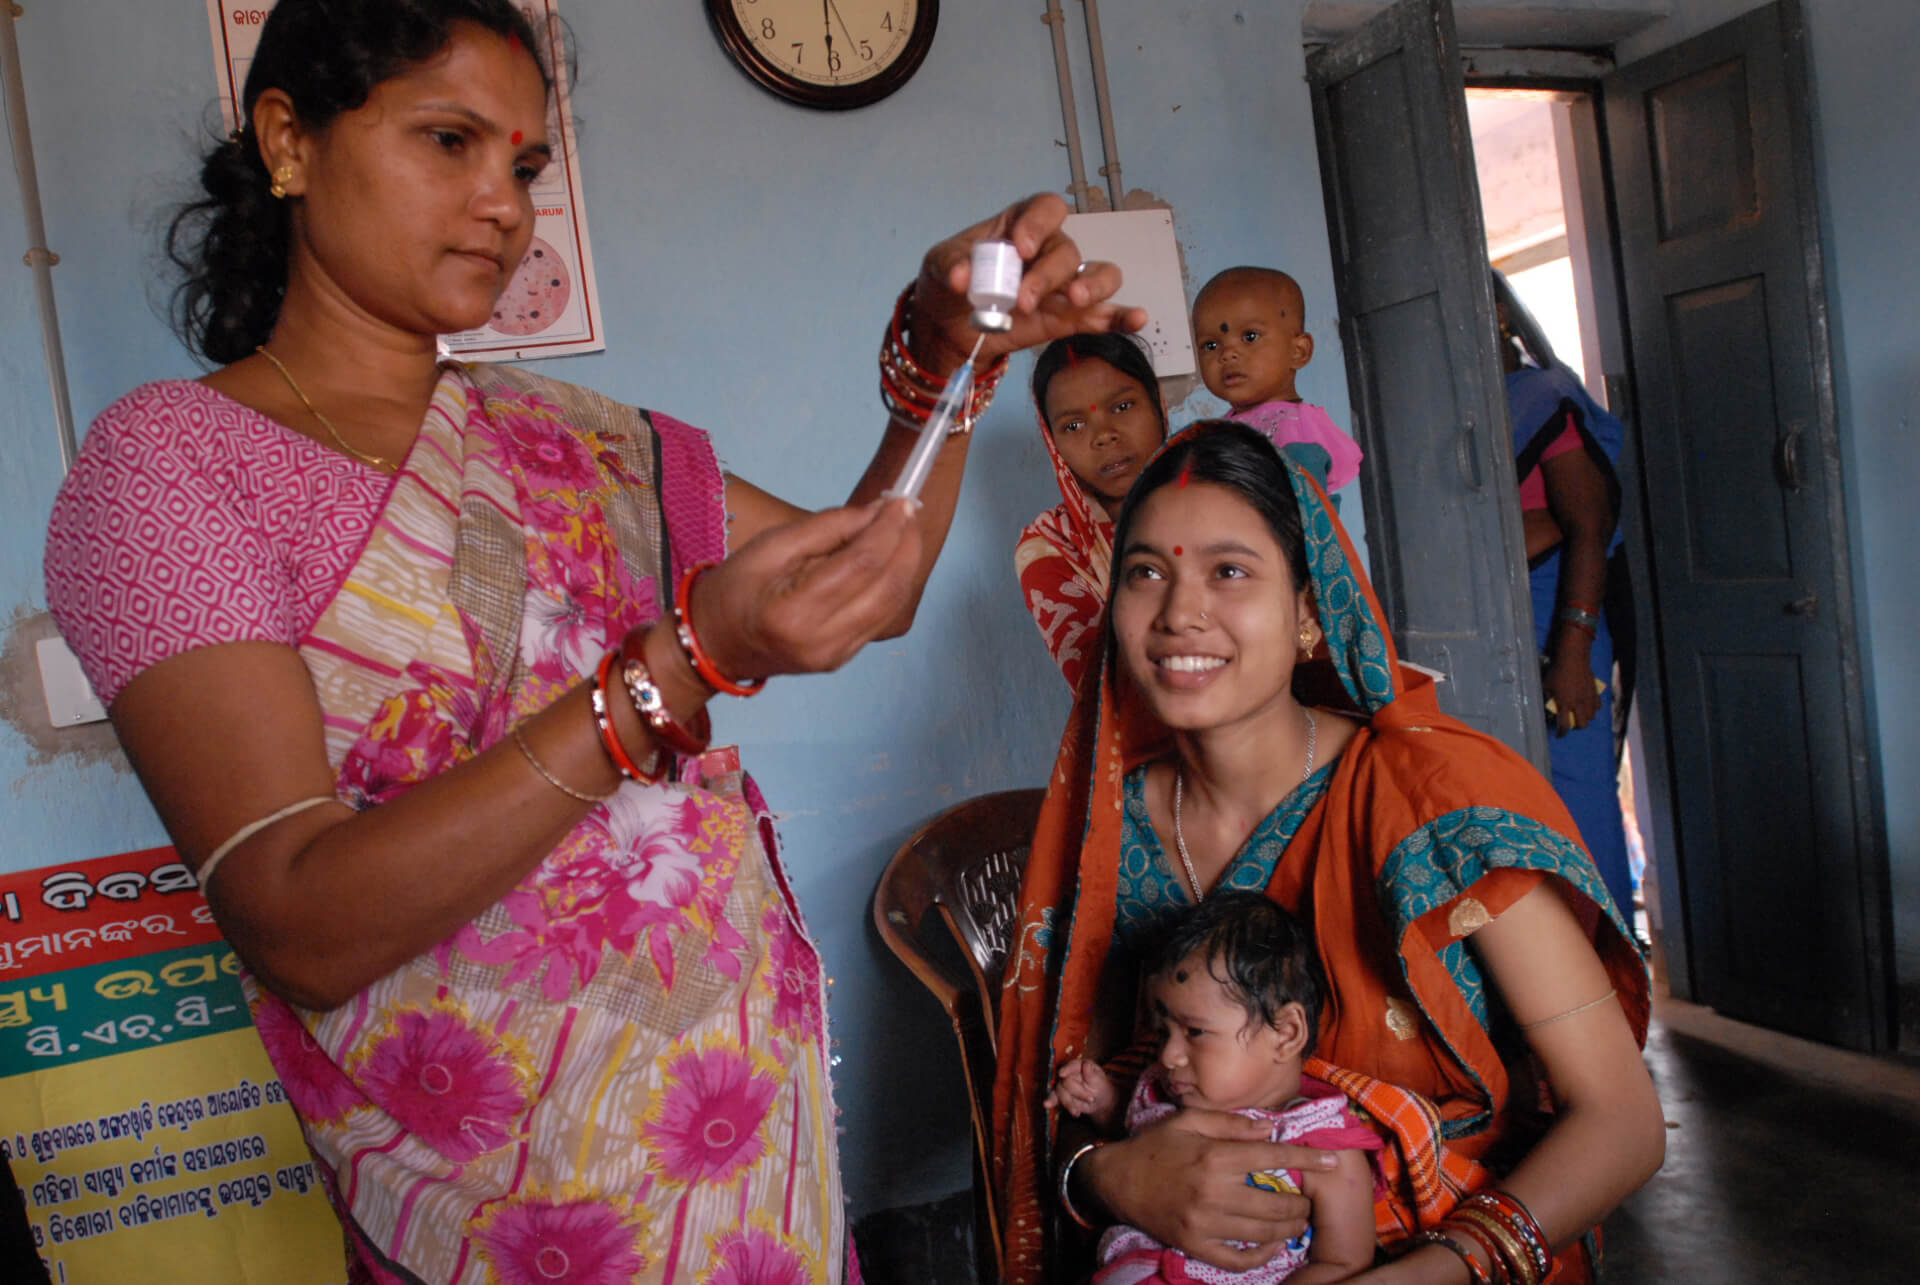 Could the American Anti-Vaxxer Movement Derail India’s Progress on Vaccinations?